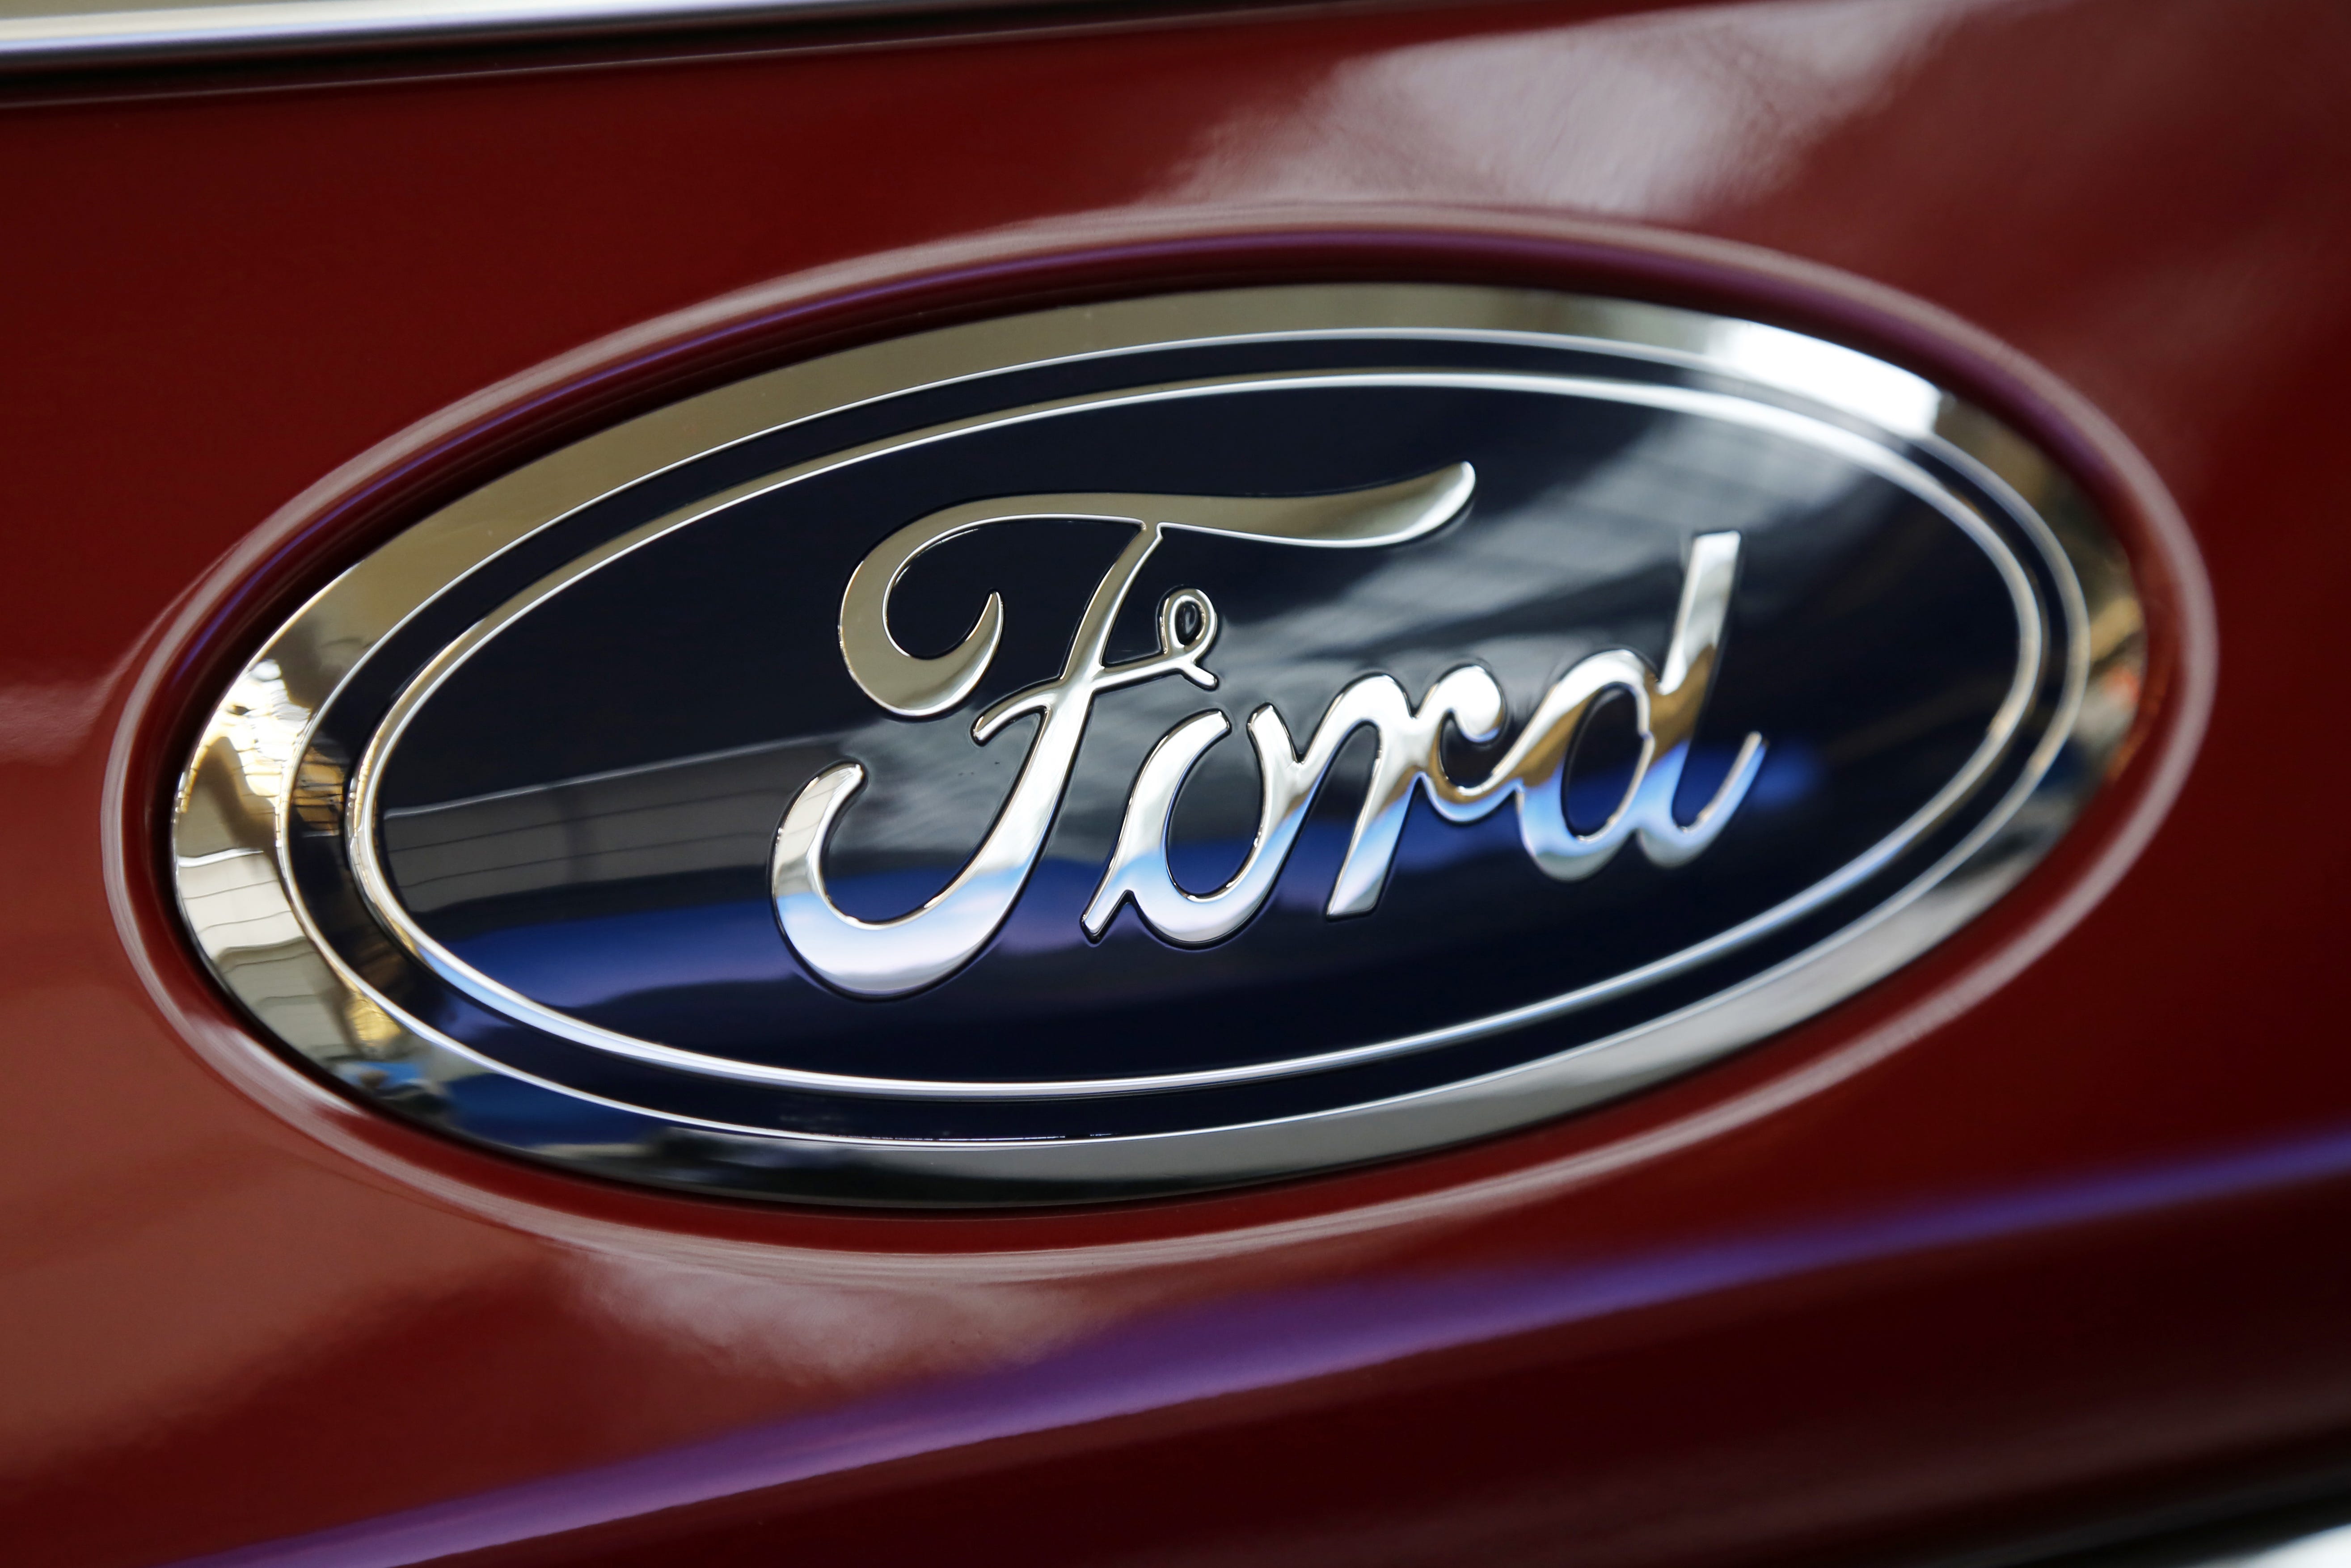 Ford Motor Co. says its financial results in 2019 should be an improvement over the year prior.